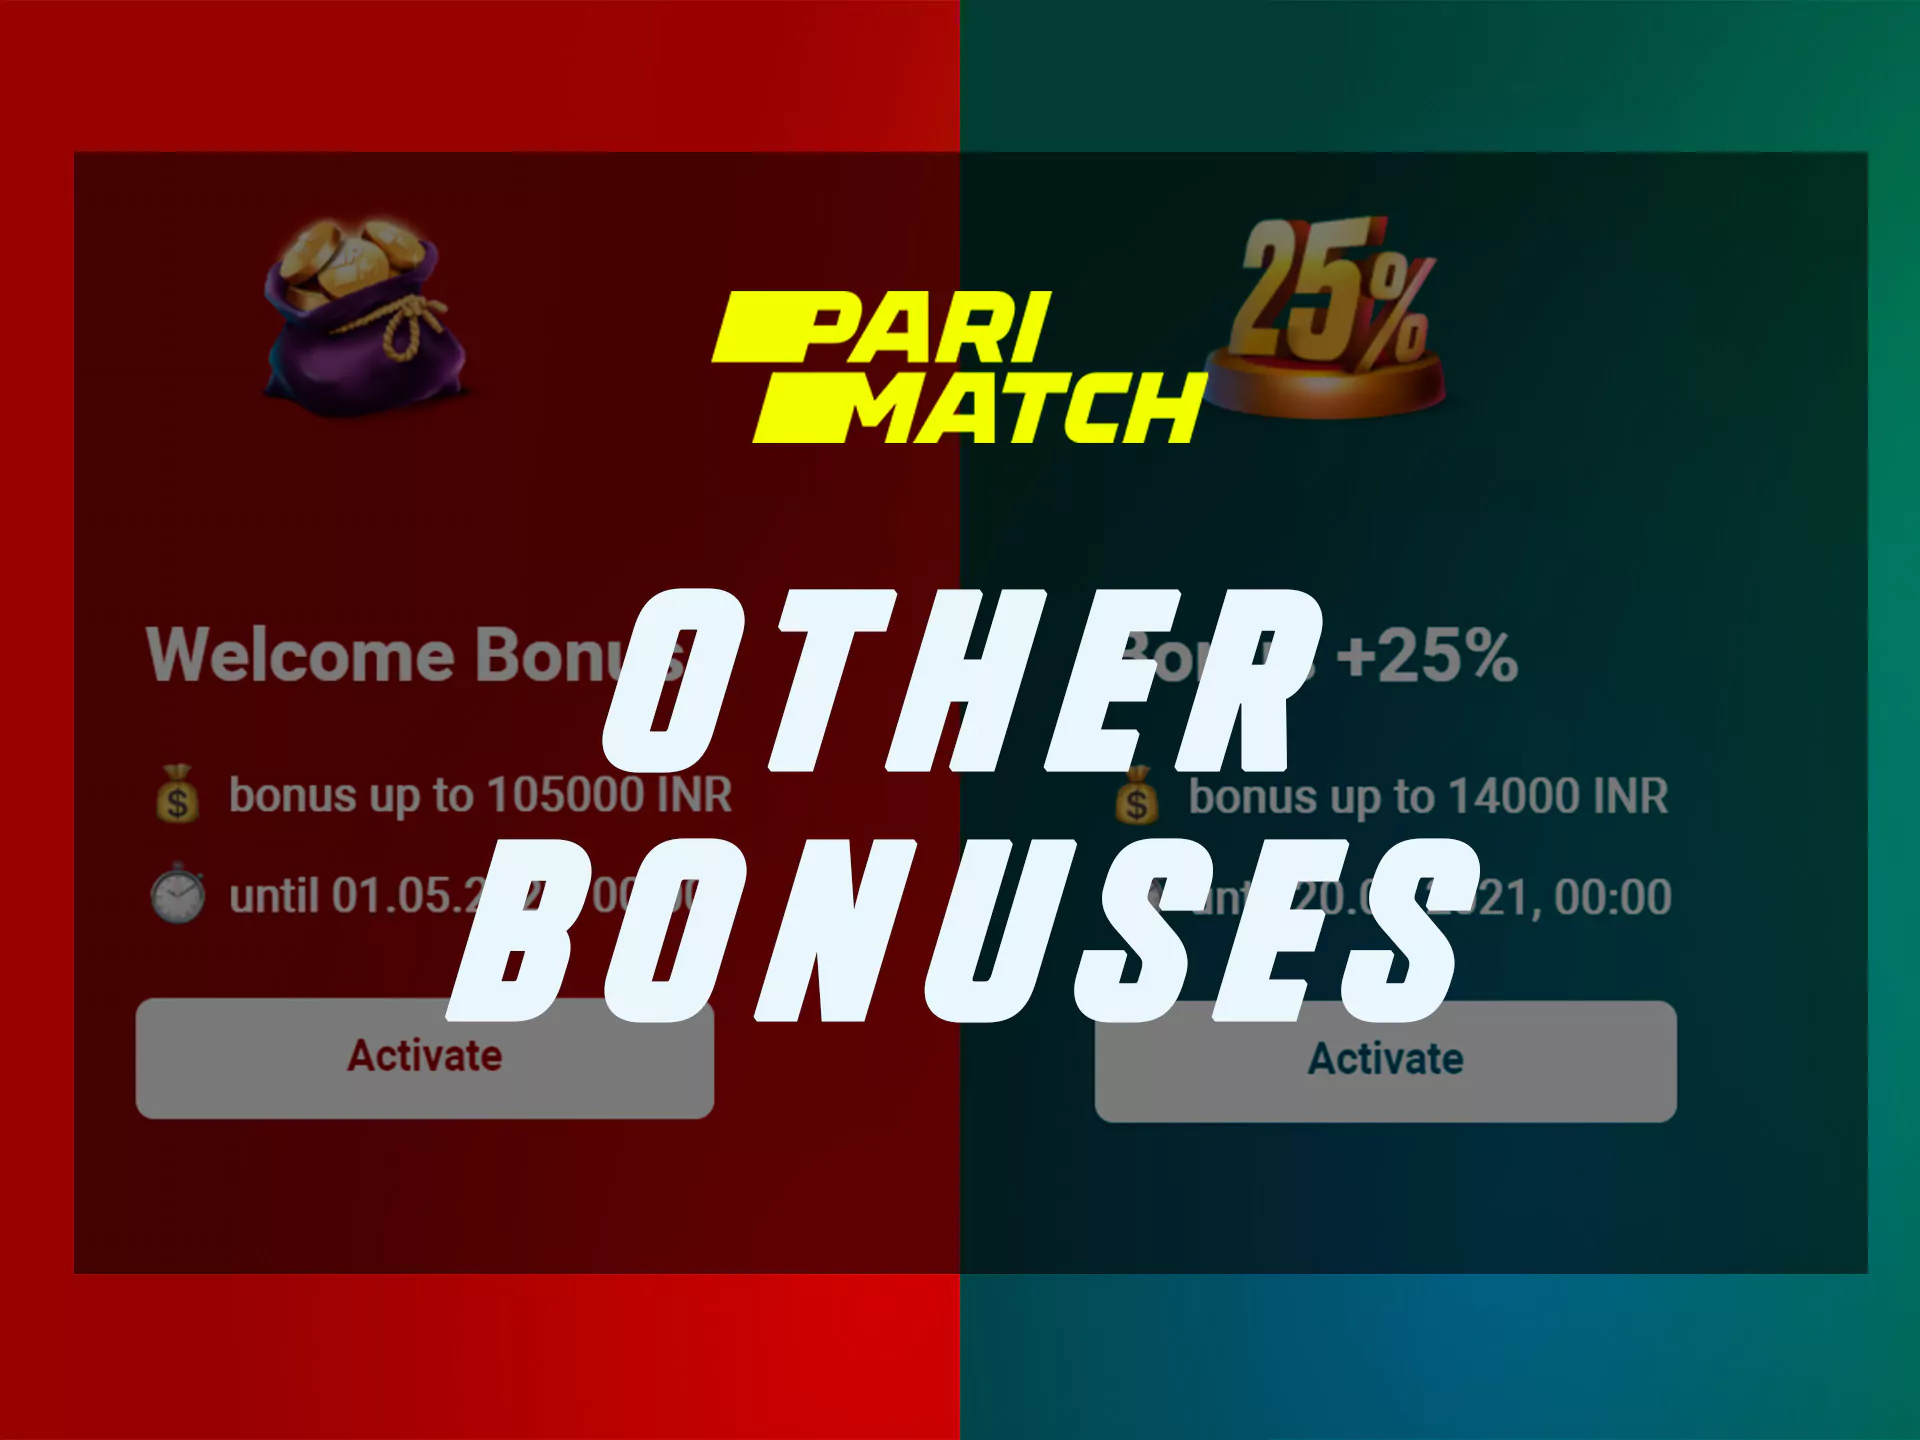 You can also participate in other Parimatch bonuses.